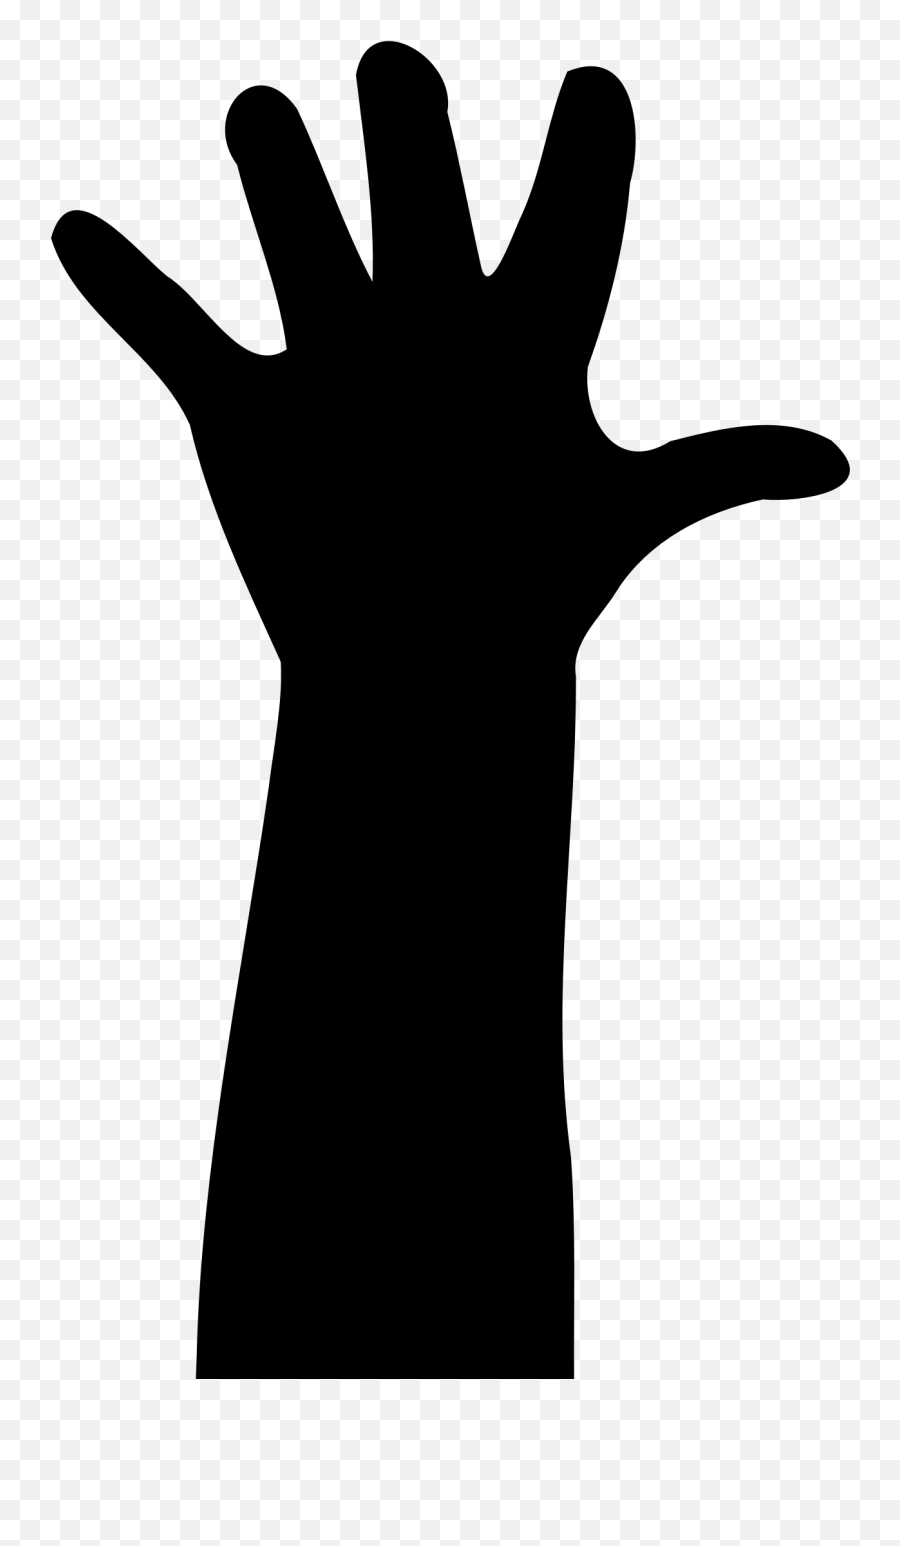 Hand Clipart Clapping Hand Clapping Transparent Free For - Black Arm Transparent Background Emoji,Hand Clapping Emoji